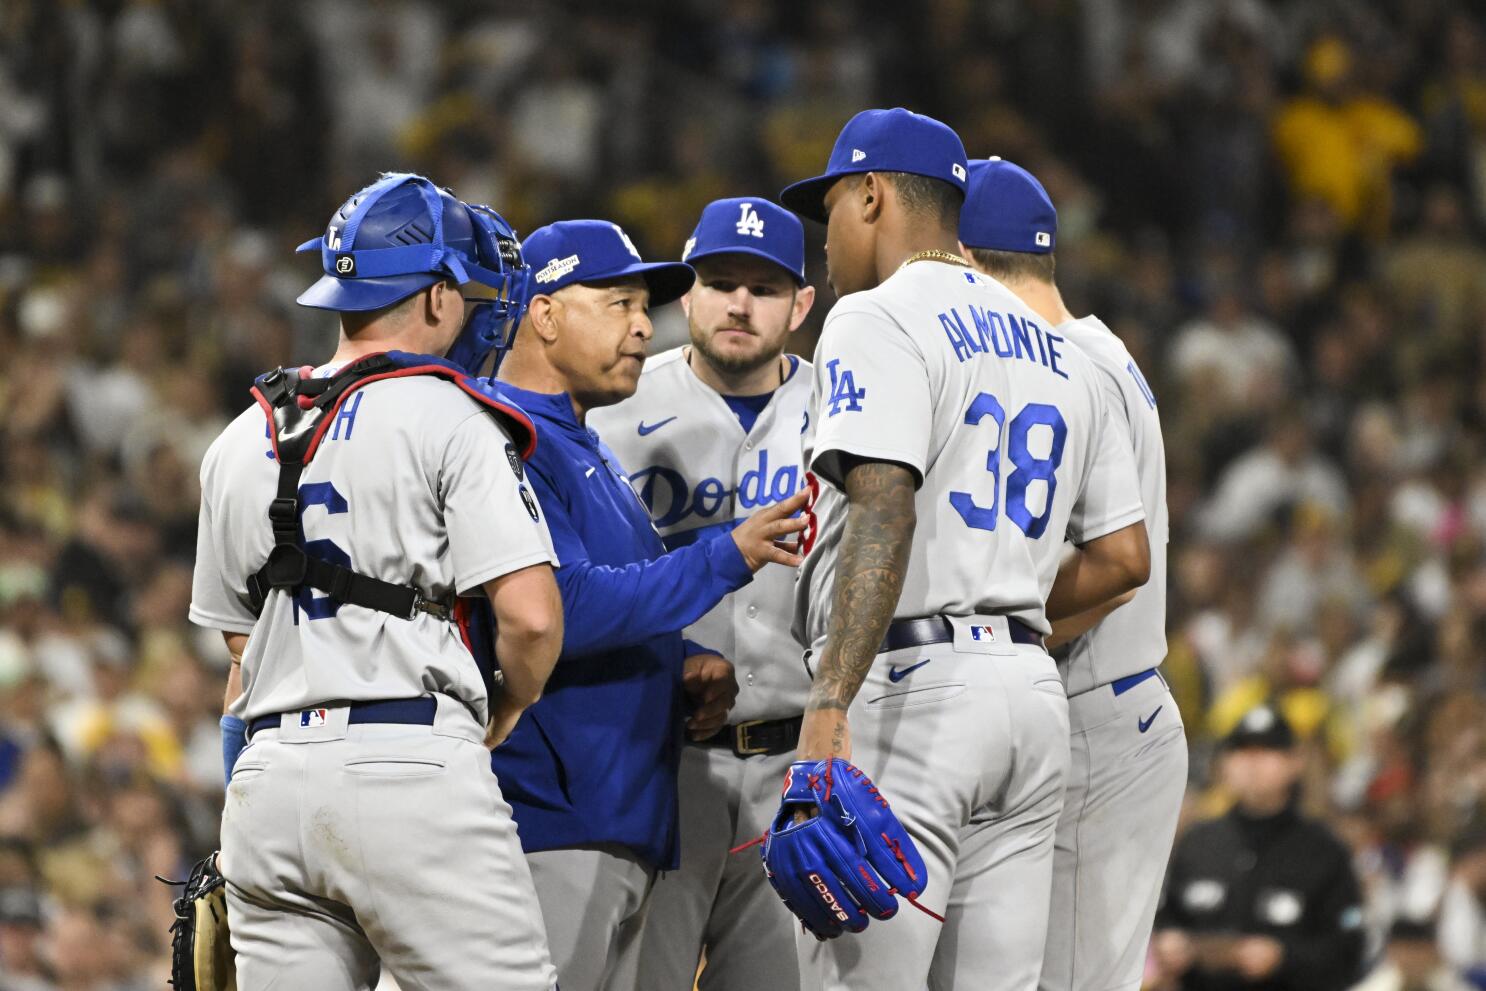 Ousted Dodgers Drive Home Disconnect Between Regular Season and Playoffs